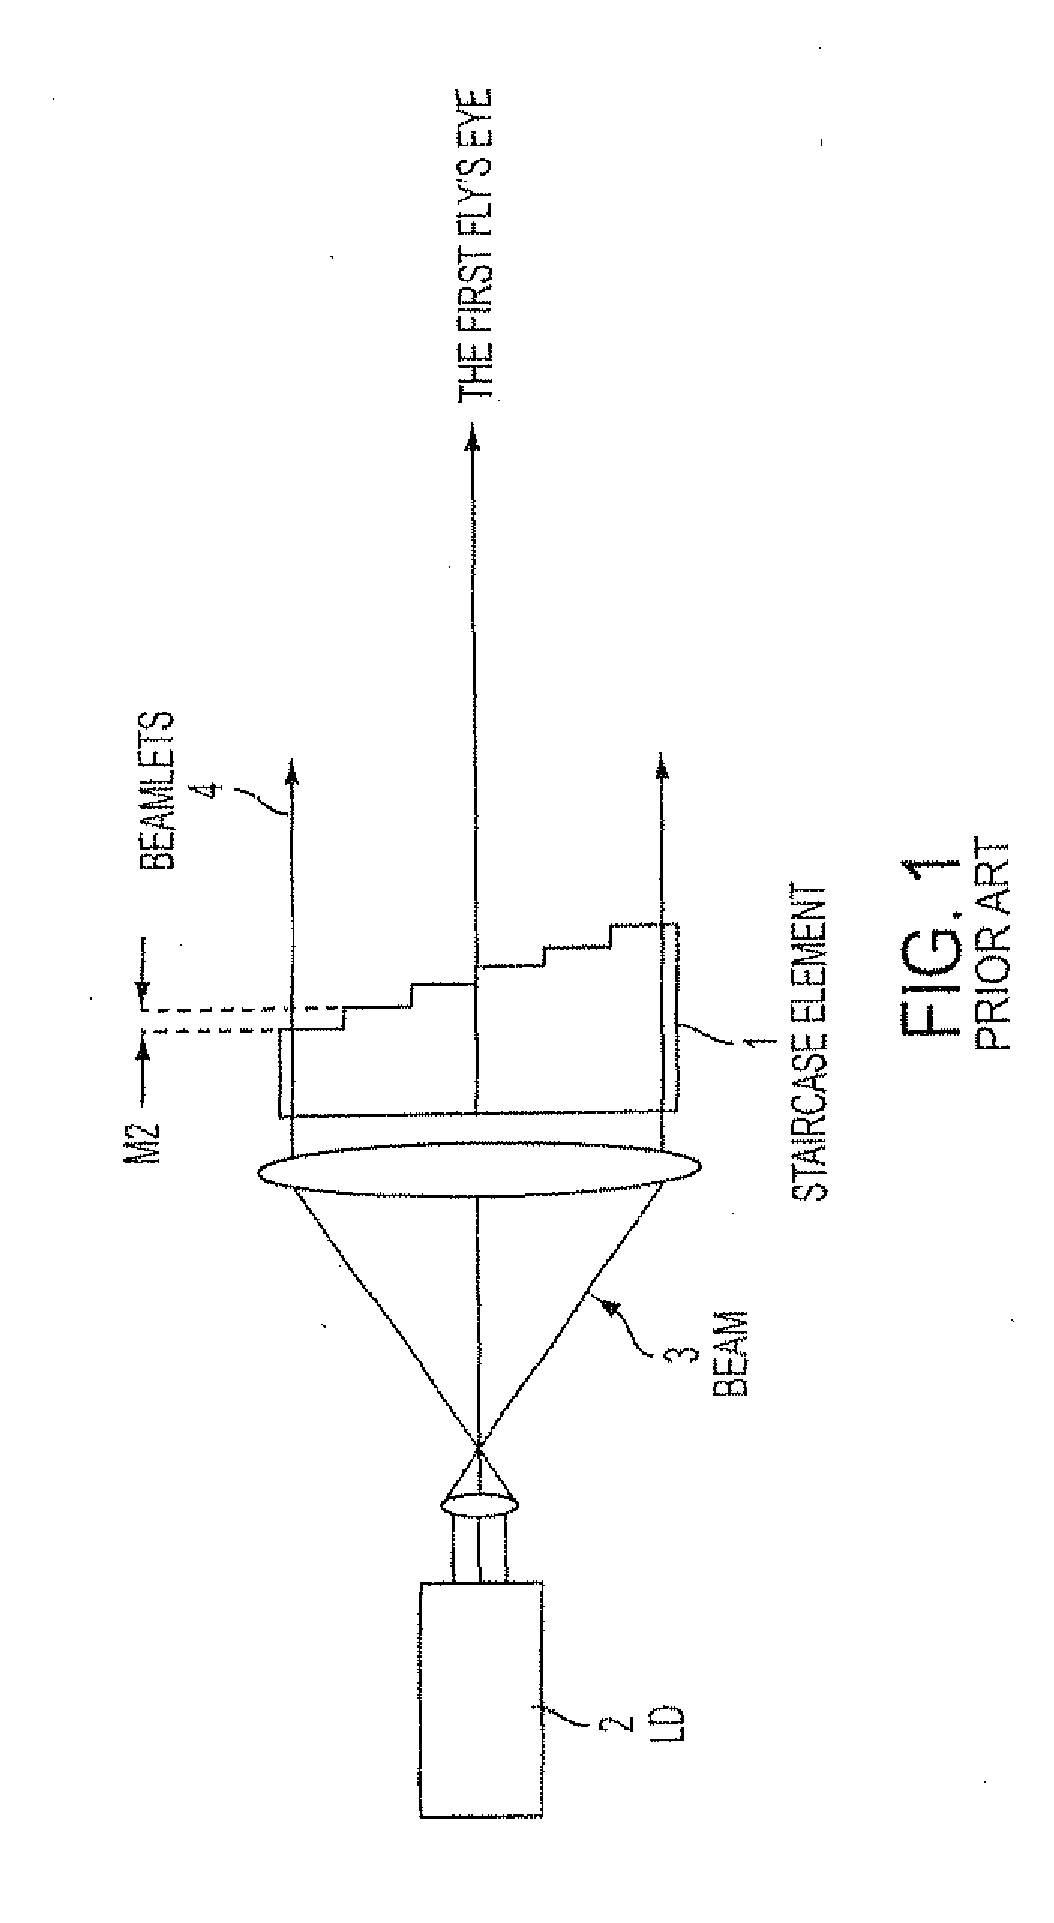 Laser illumination system with reduced speckle